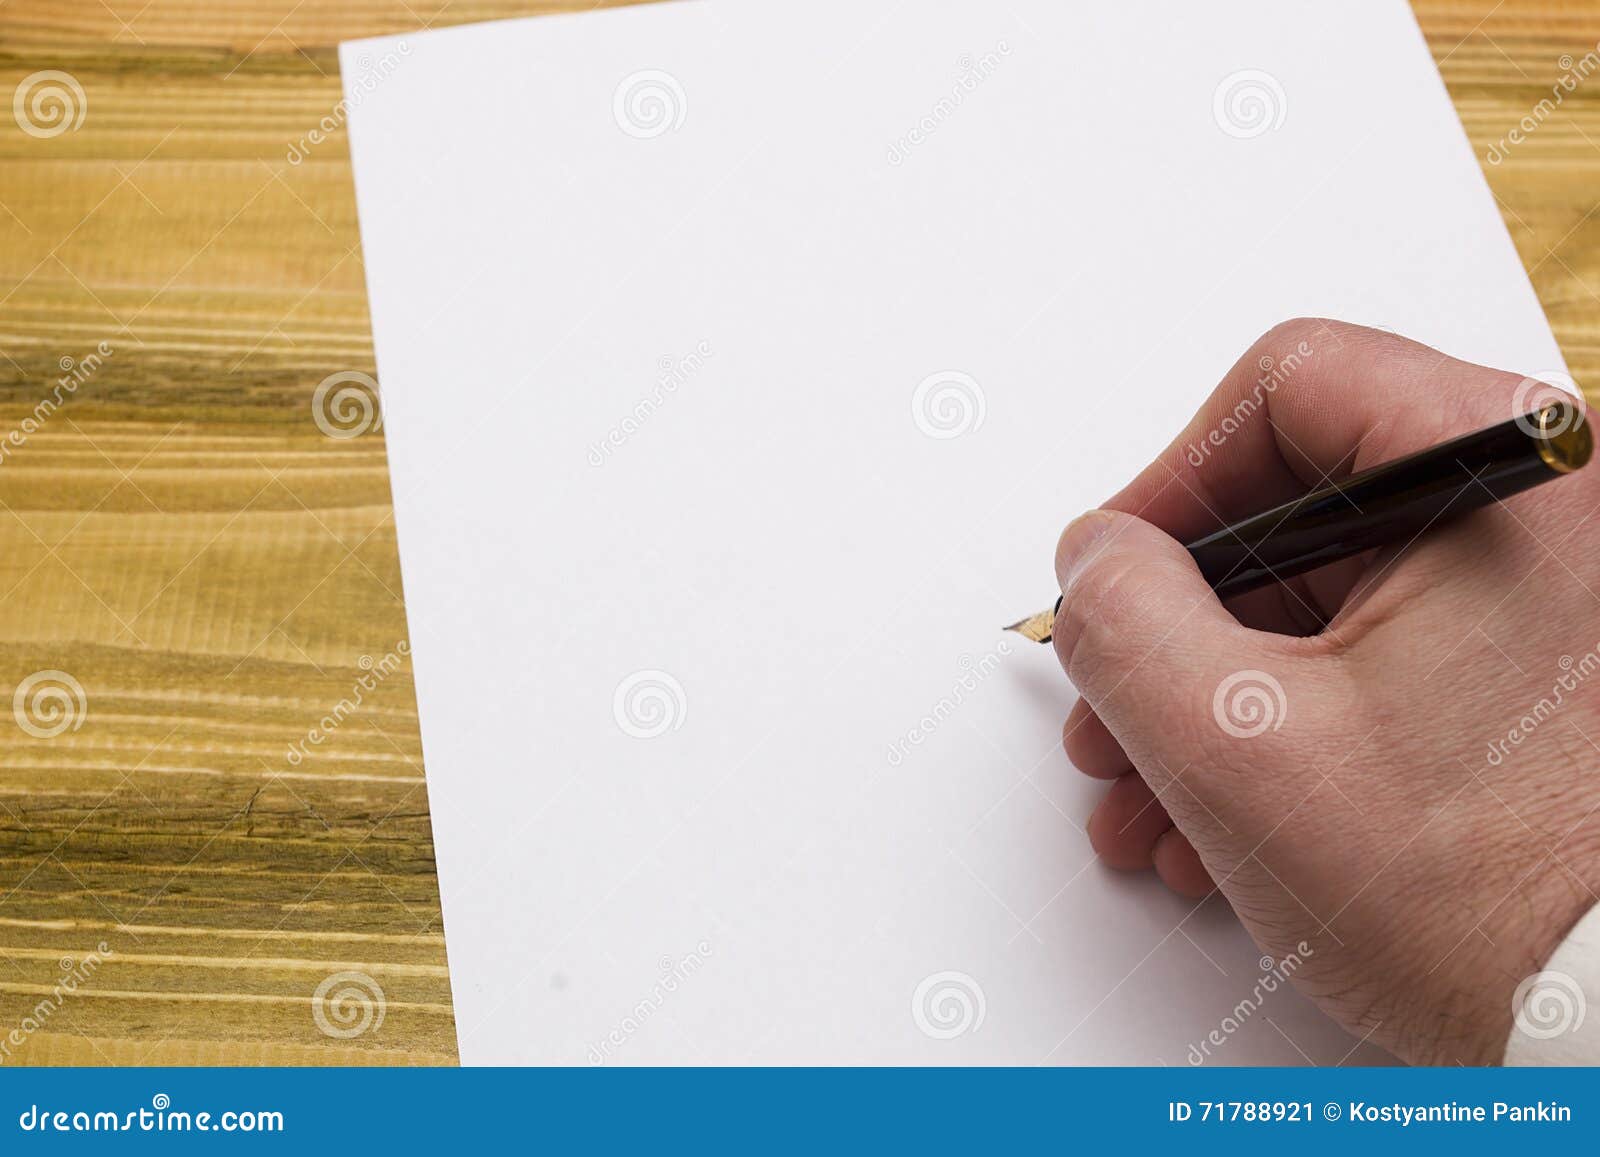 Hand with Pen Writing on Empty Paper Stock Image - Image of business ...